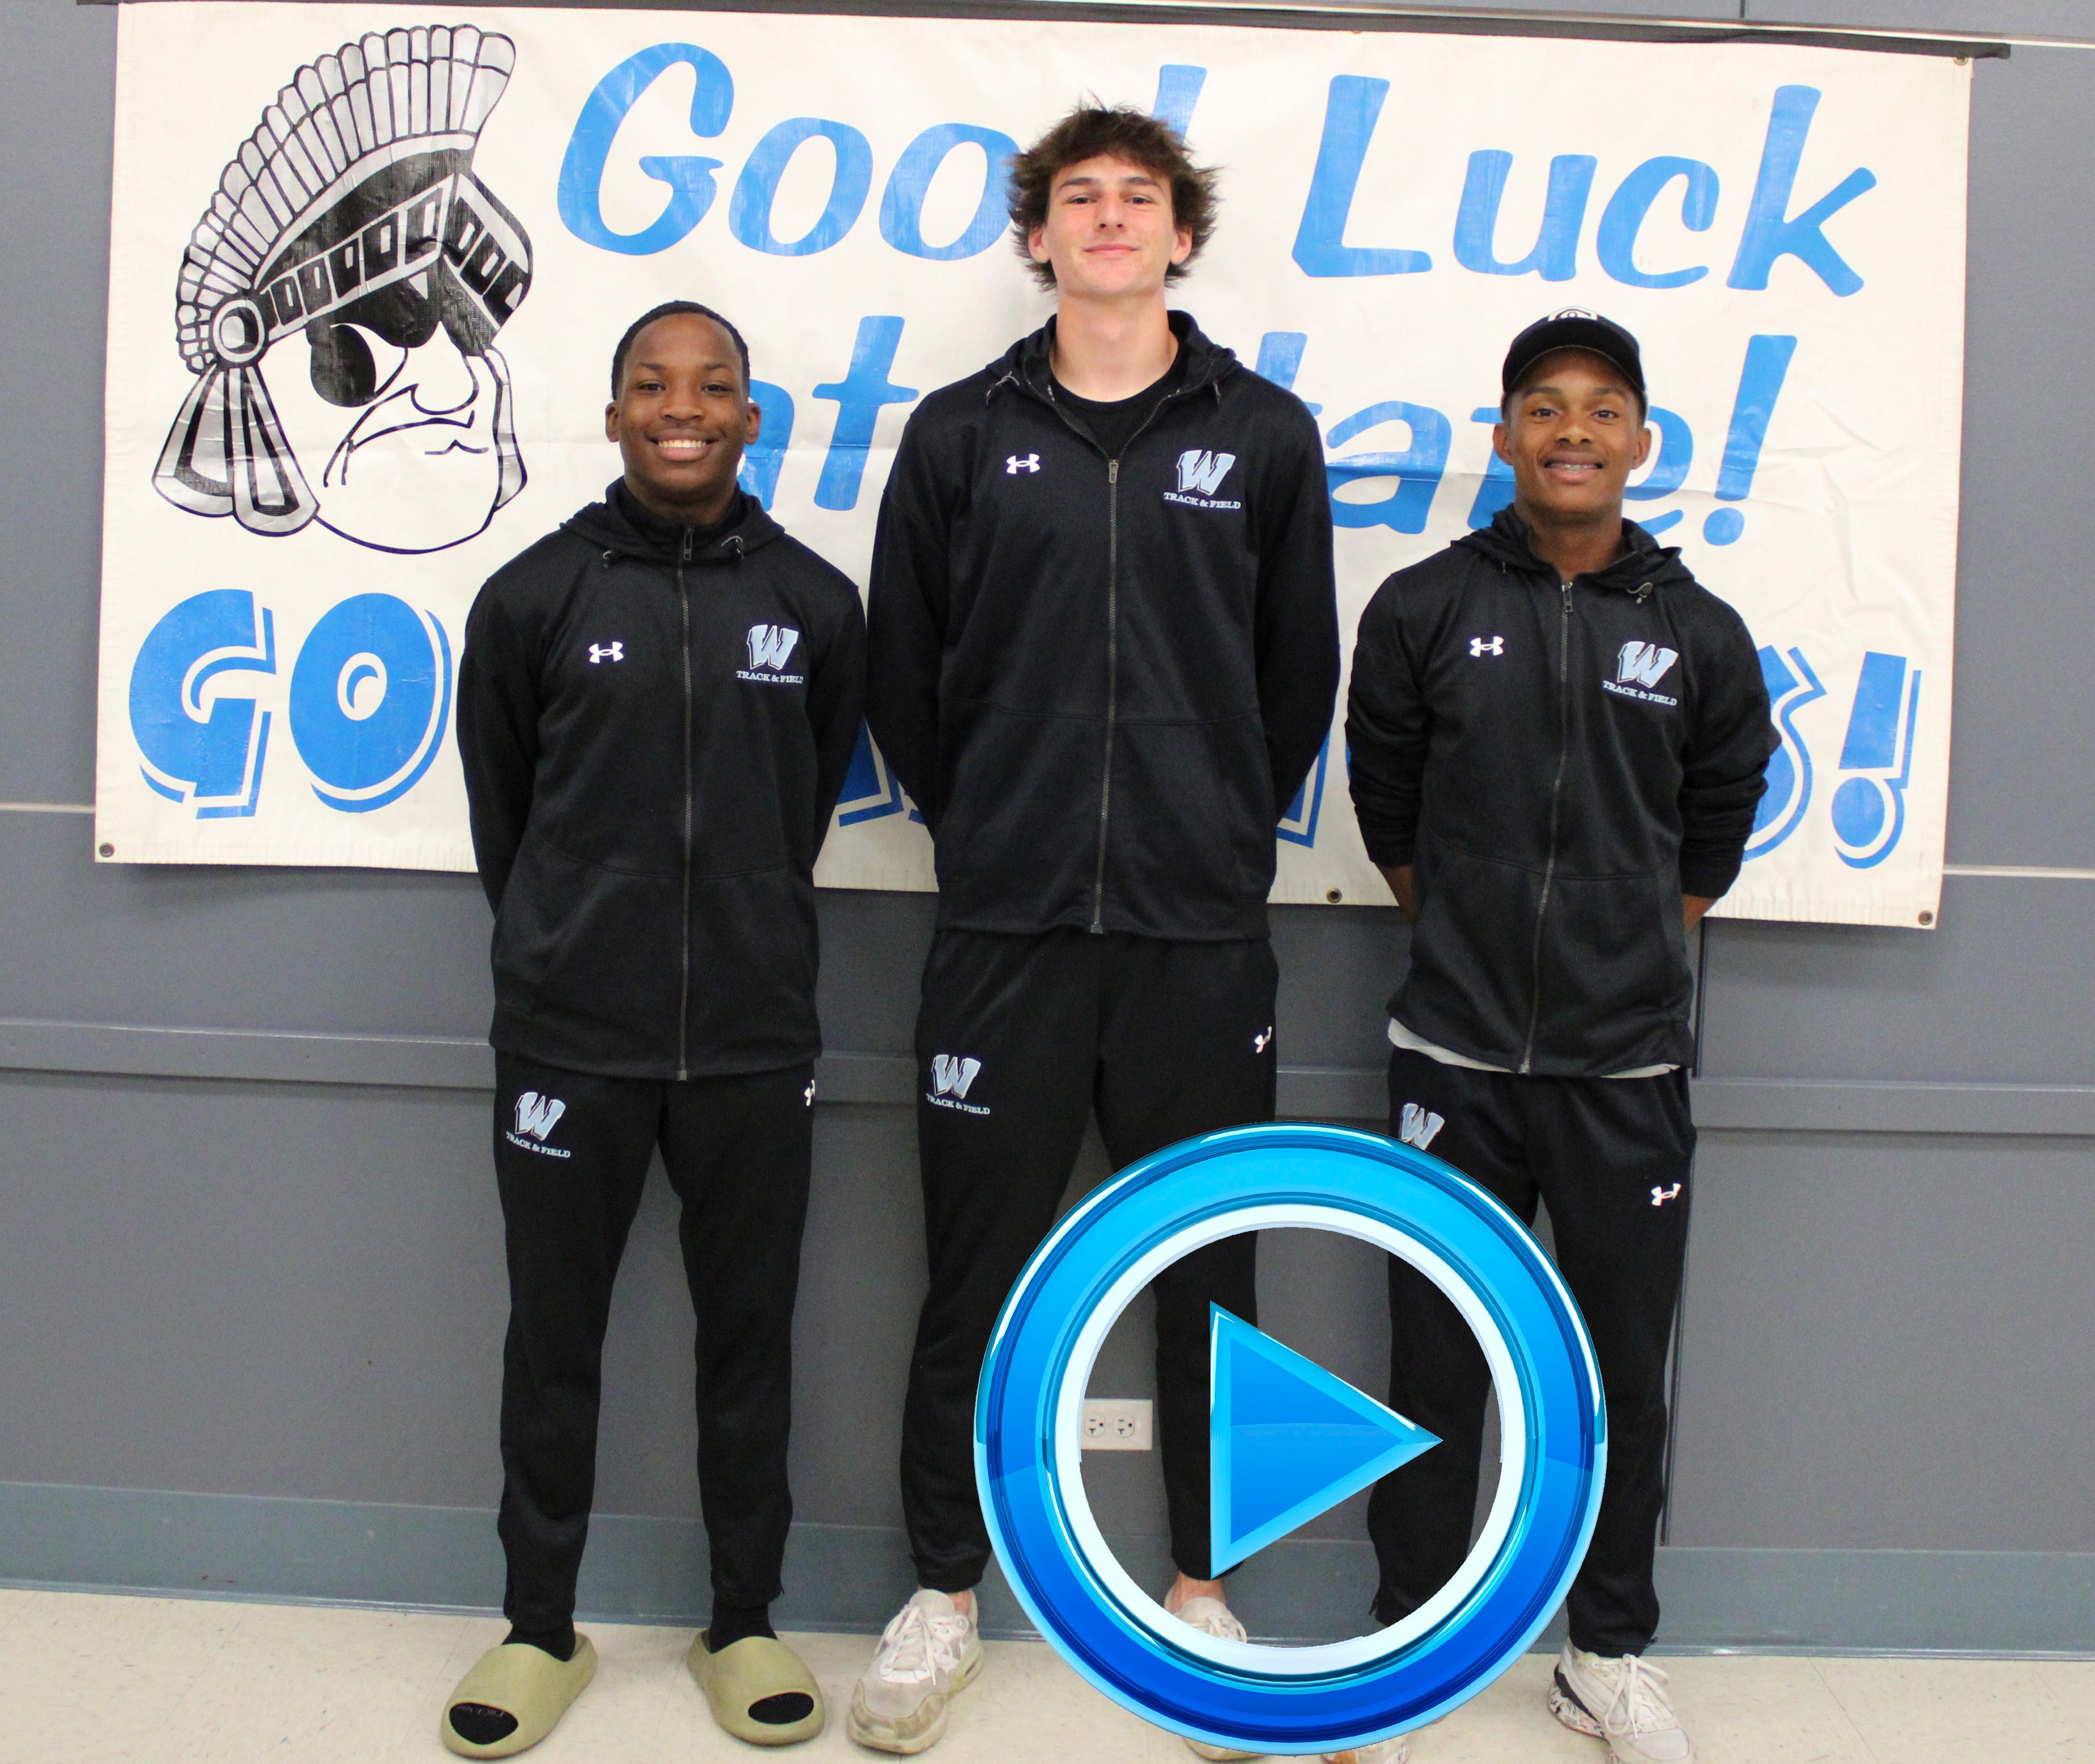 Willowbrook hosts State send-off celebration for three members of Boys Track and Field Team